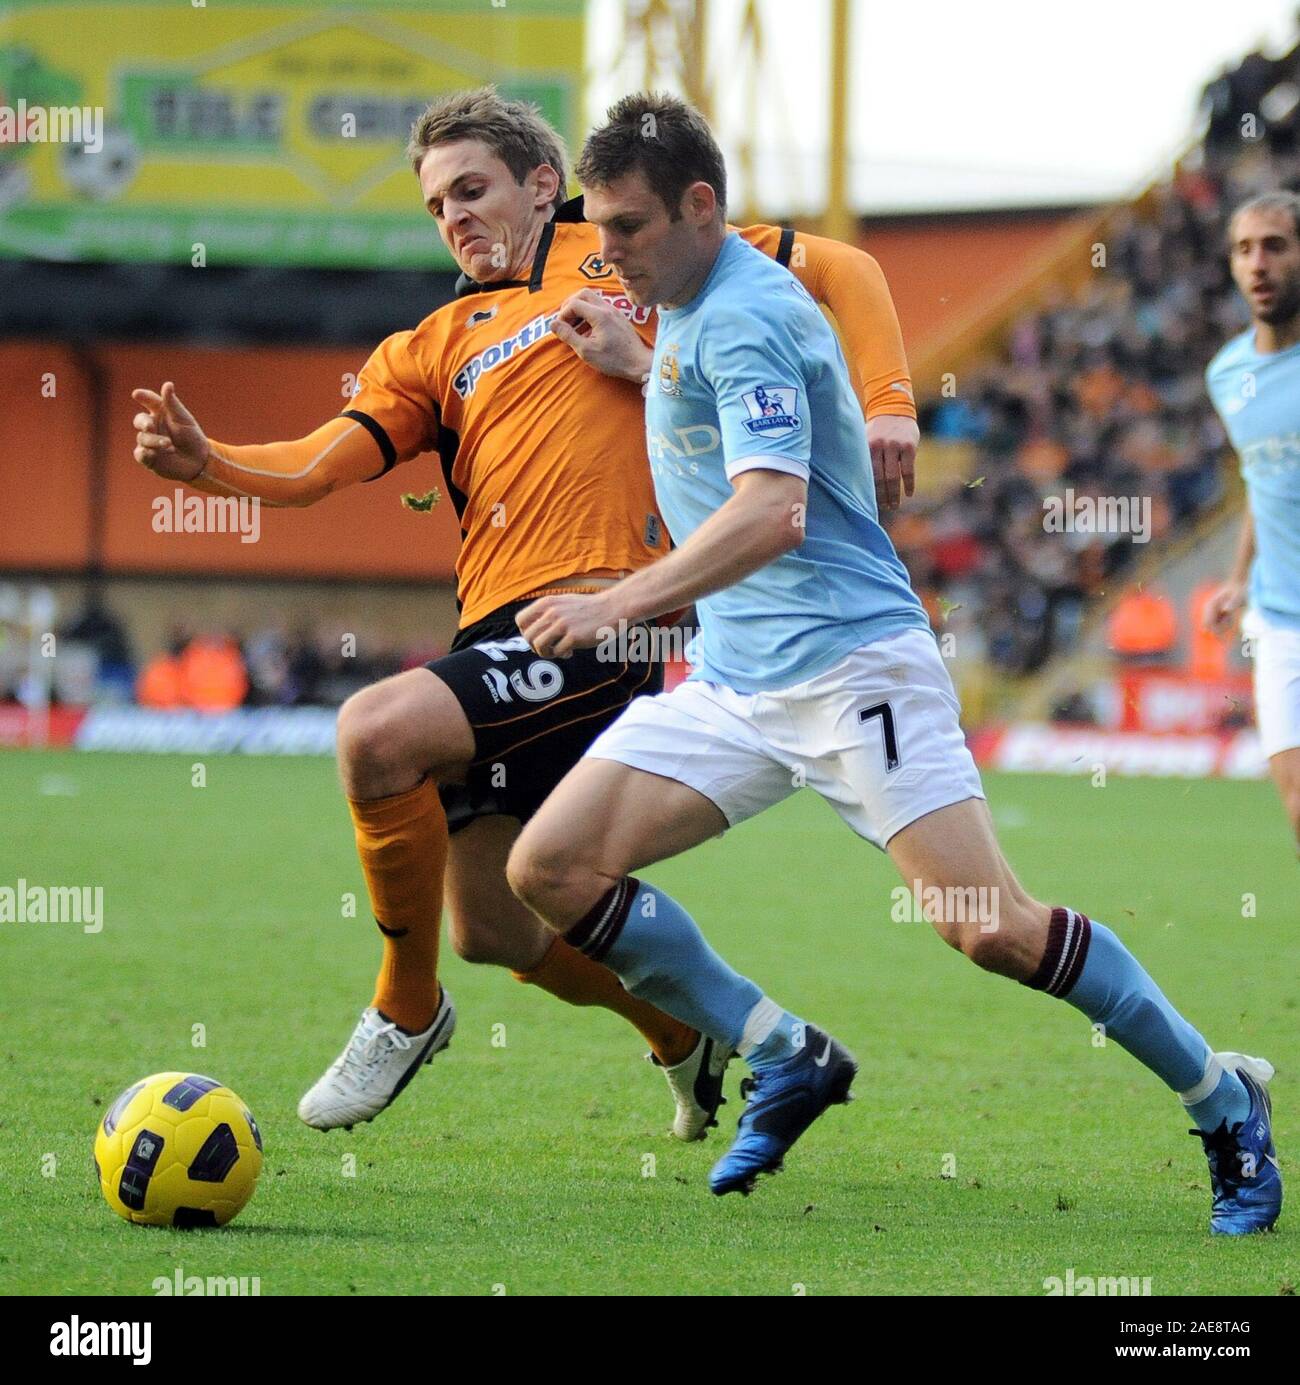 30th October 2010 - Premier League Football - Wolverhampton Wanderers Vs Manchester City - Kevin Doyle challenges James Milner. Photographer: Paul Roberts / OneUpTop/Alamy. Stock Photo